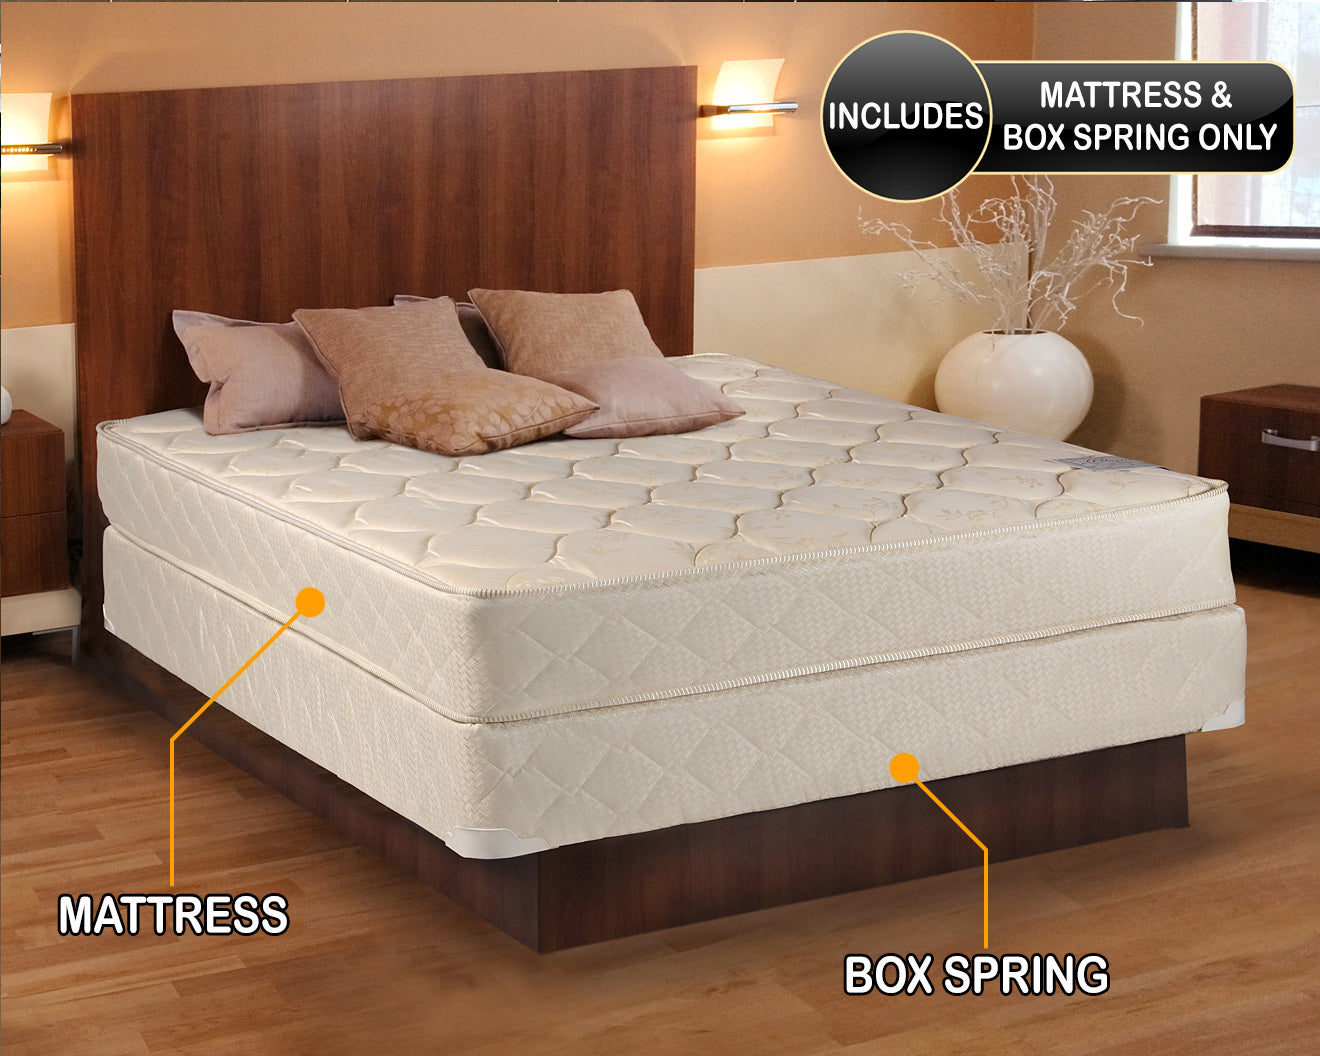 Comfort Classic Gentle Firm Queen Size Mattress and Box Spring Set - Fully Assembled, Orthopedic, Good for Your Back - Long Lasting and 1 Sided